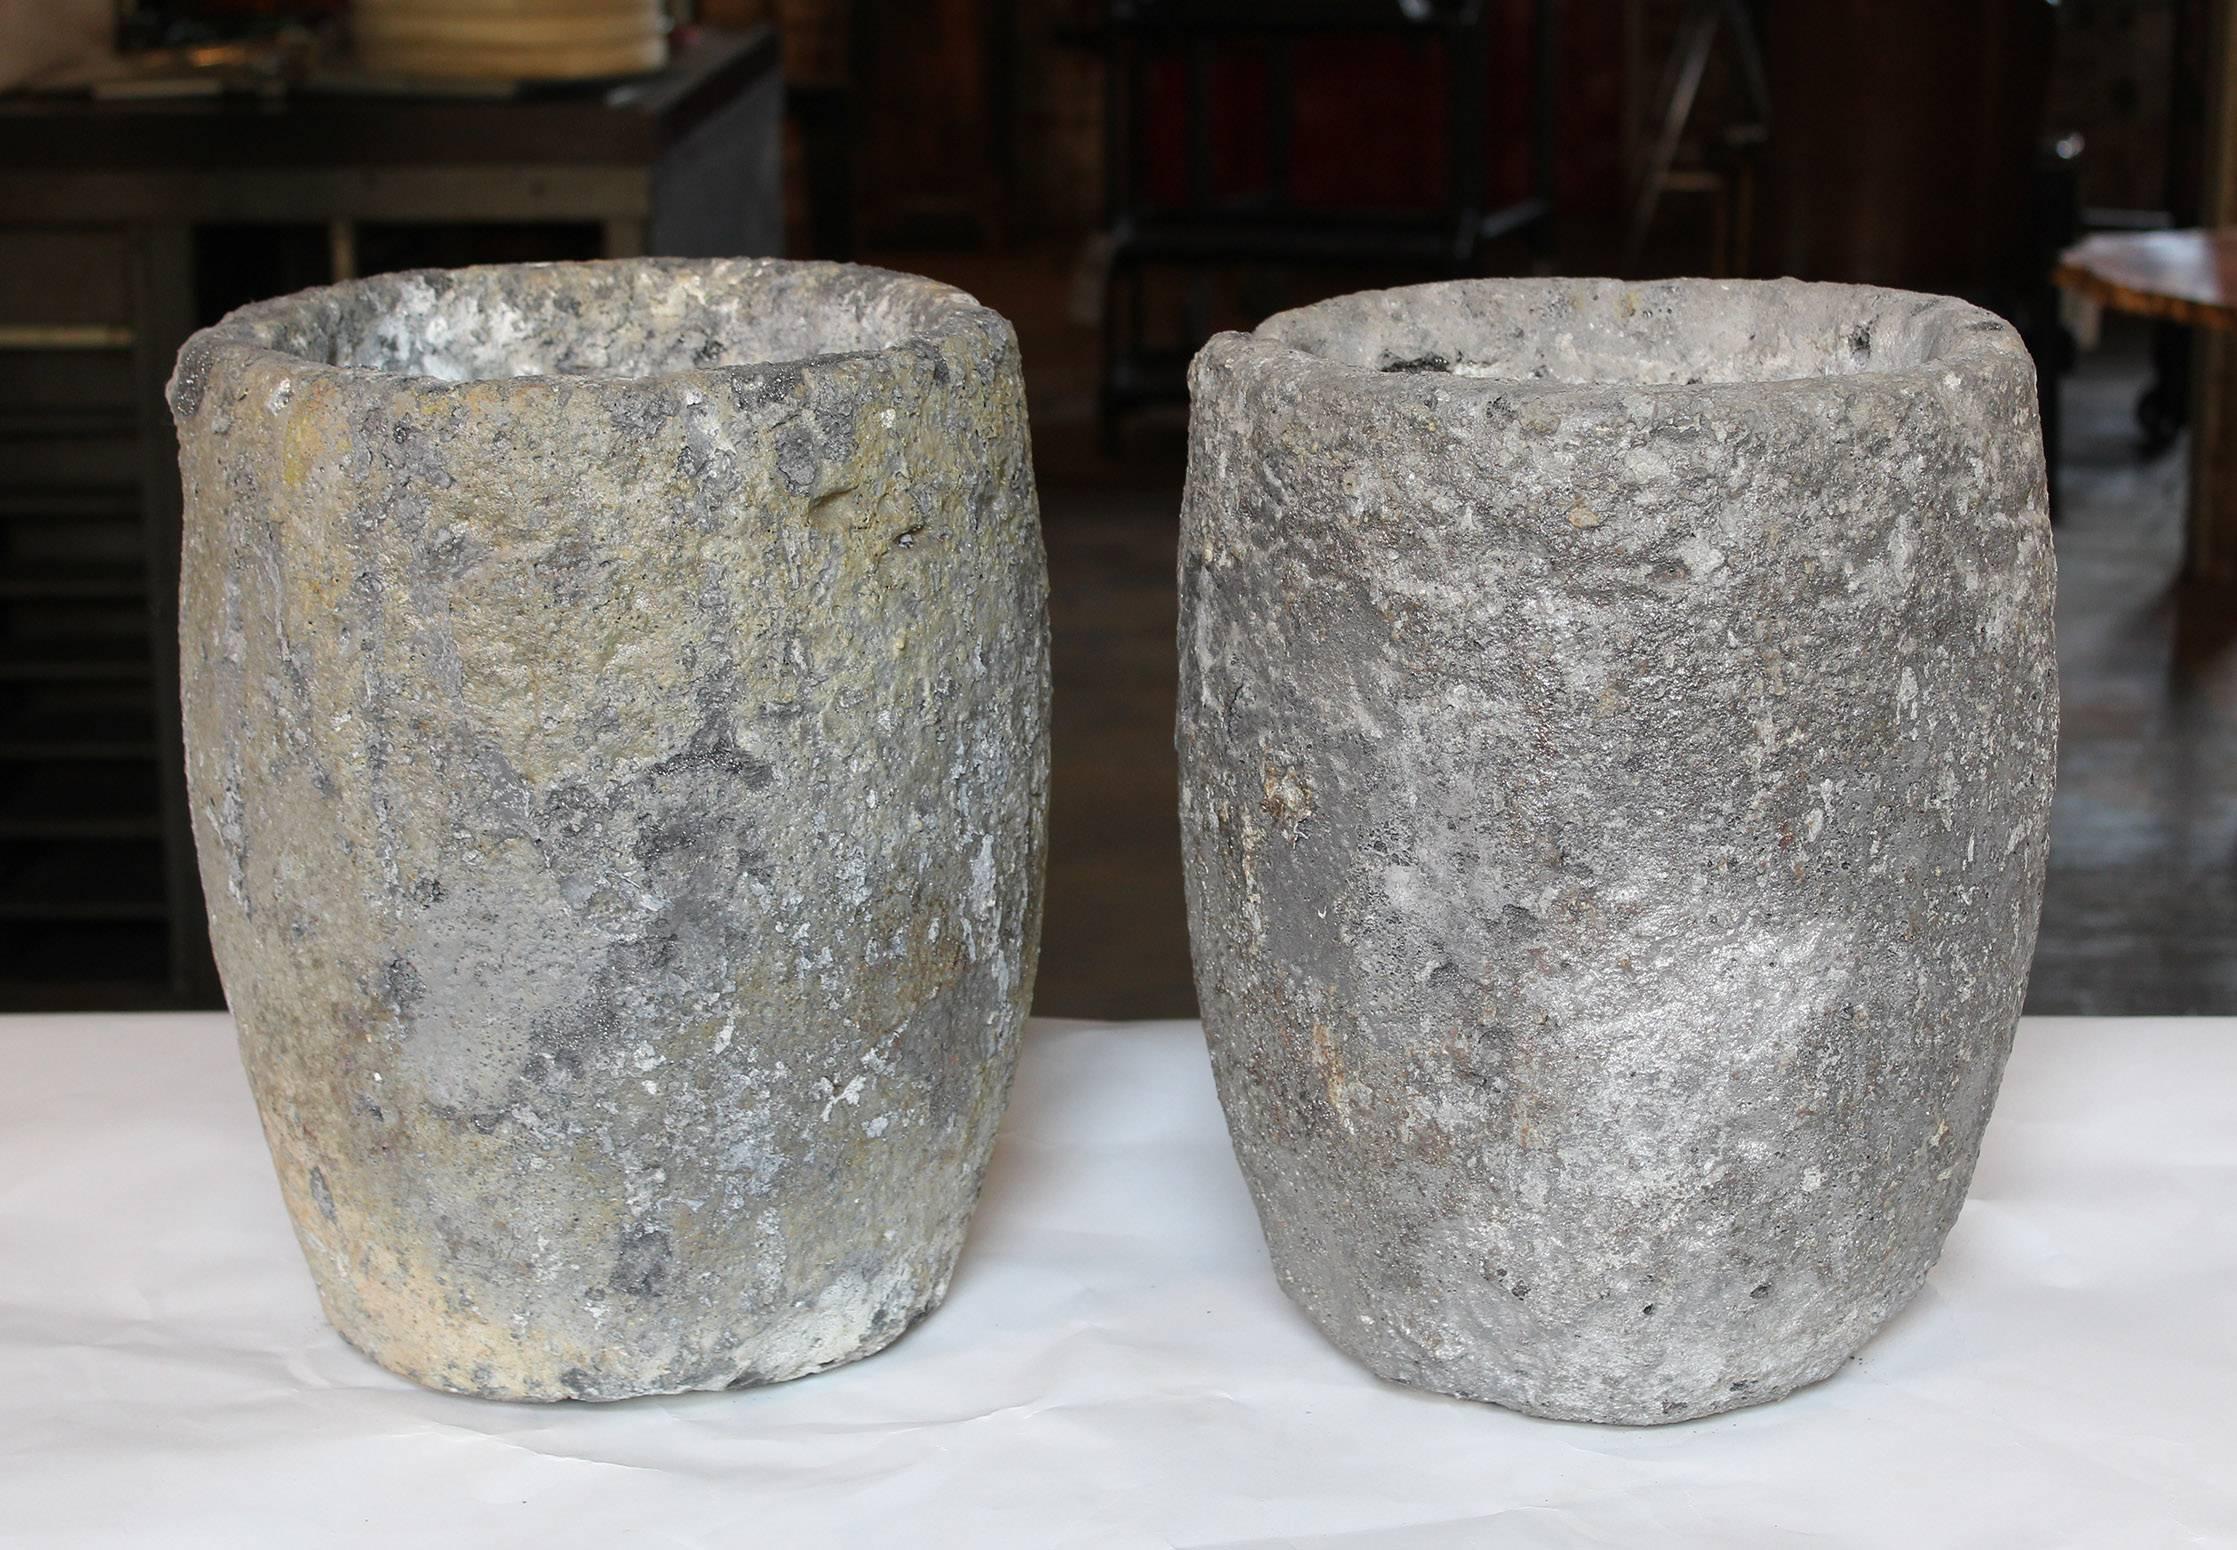 Pair of vintage foundry ceramic foundry crucibles planters, architectural. Measure: 14" tall, 11" in diameter.